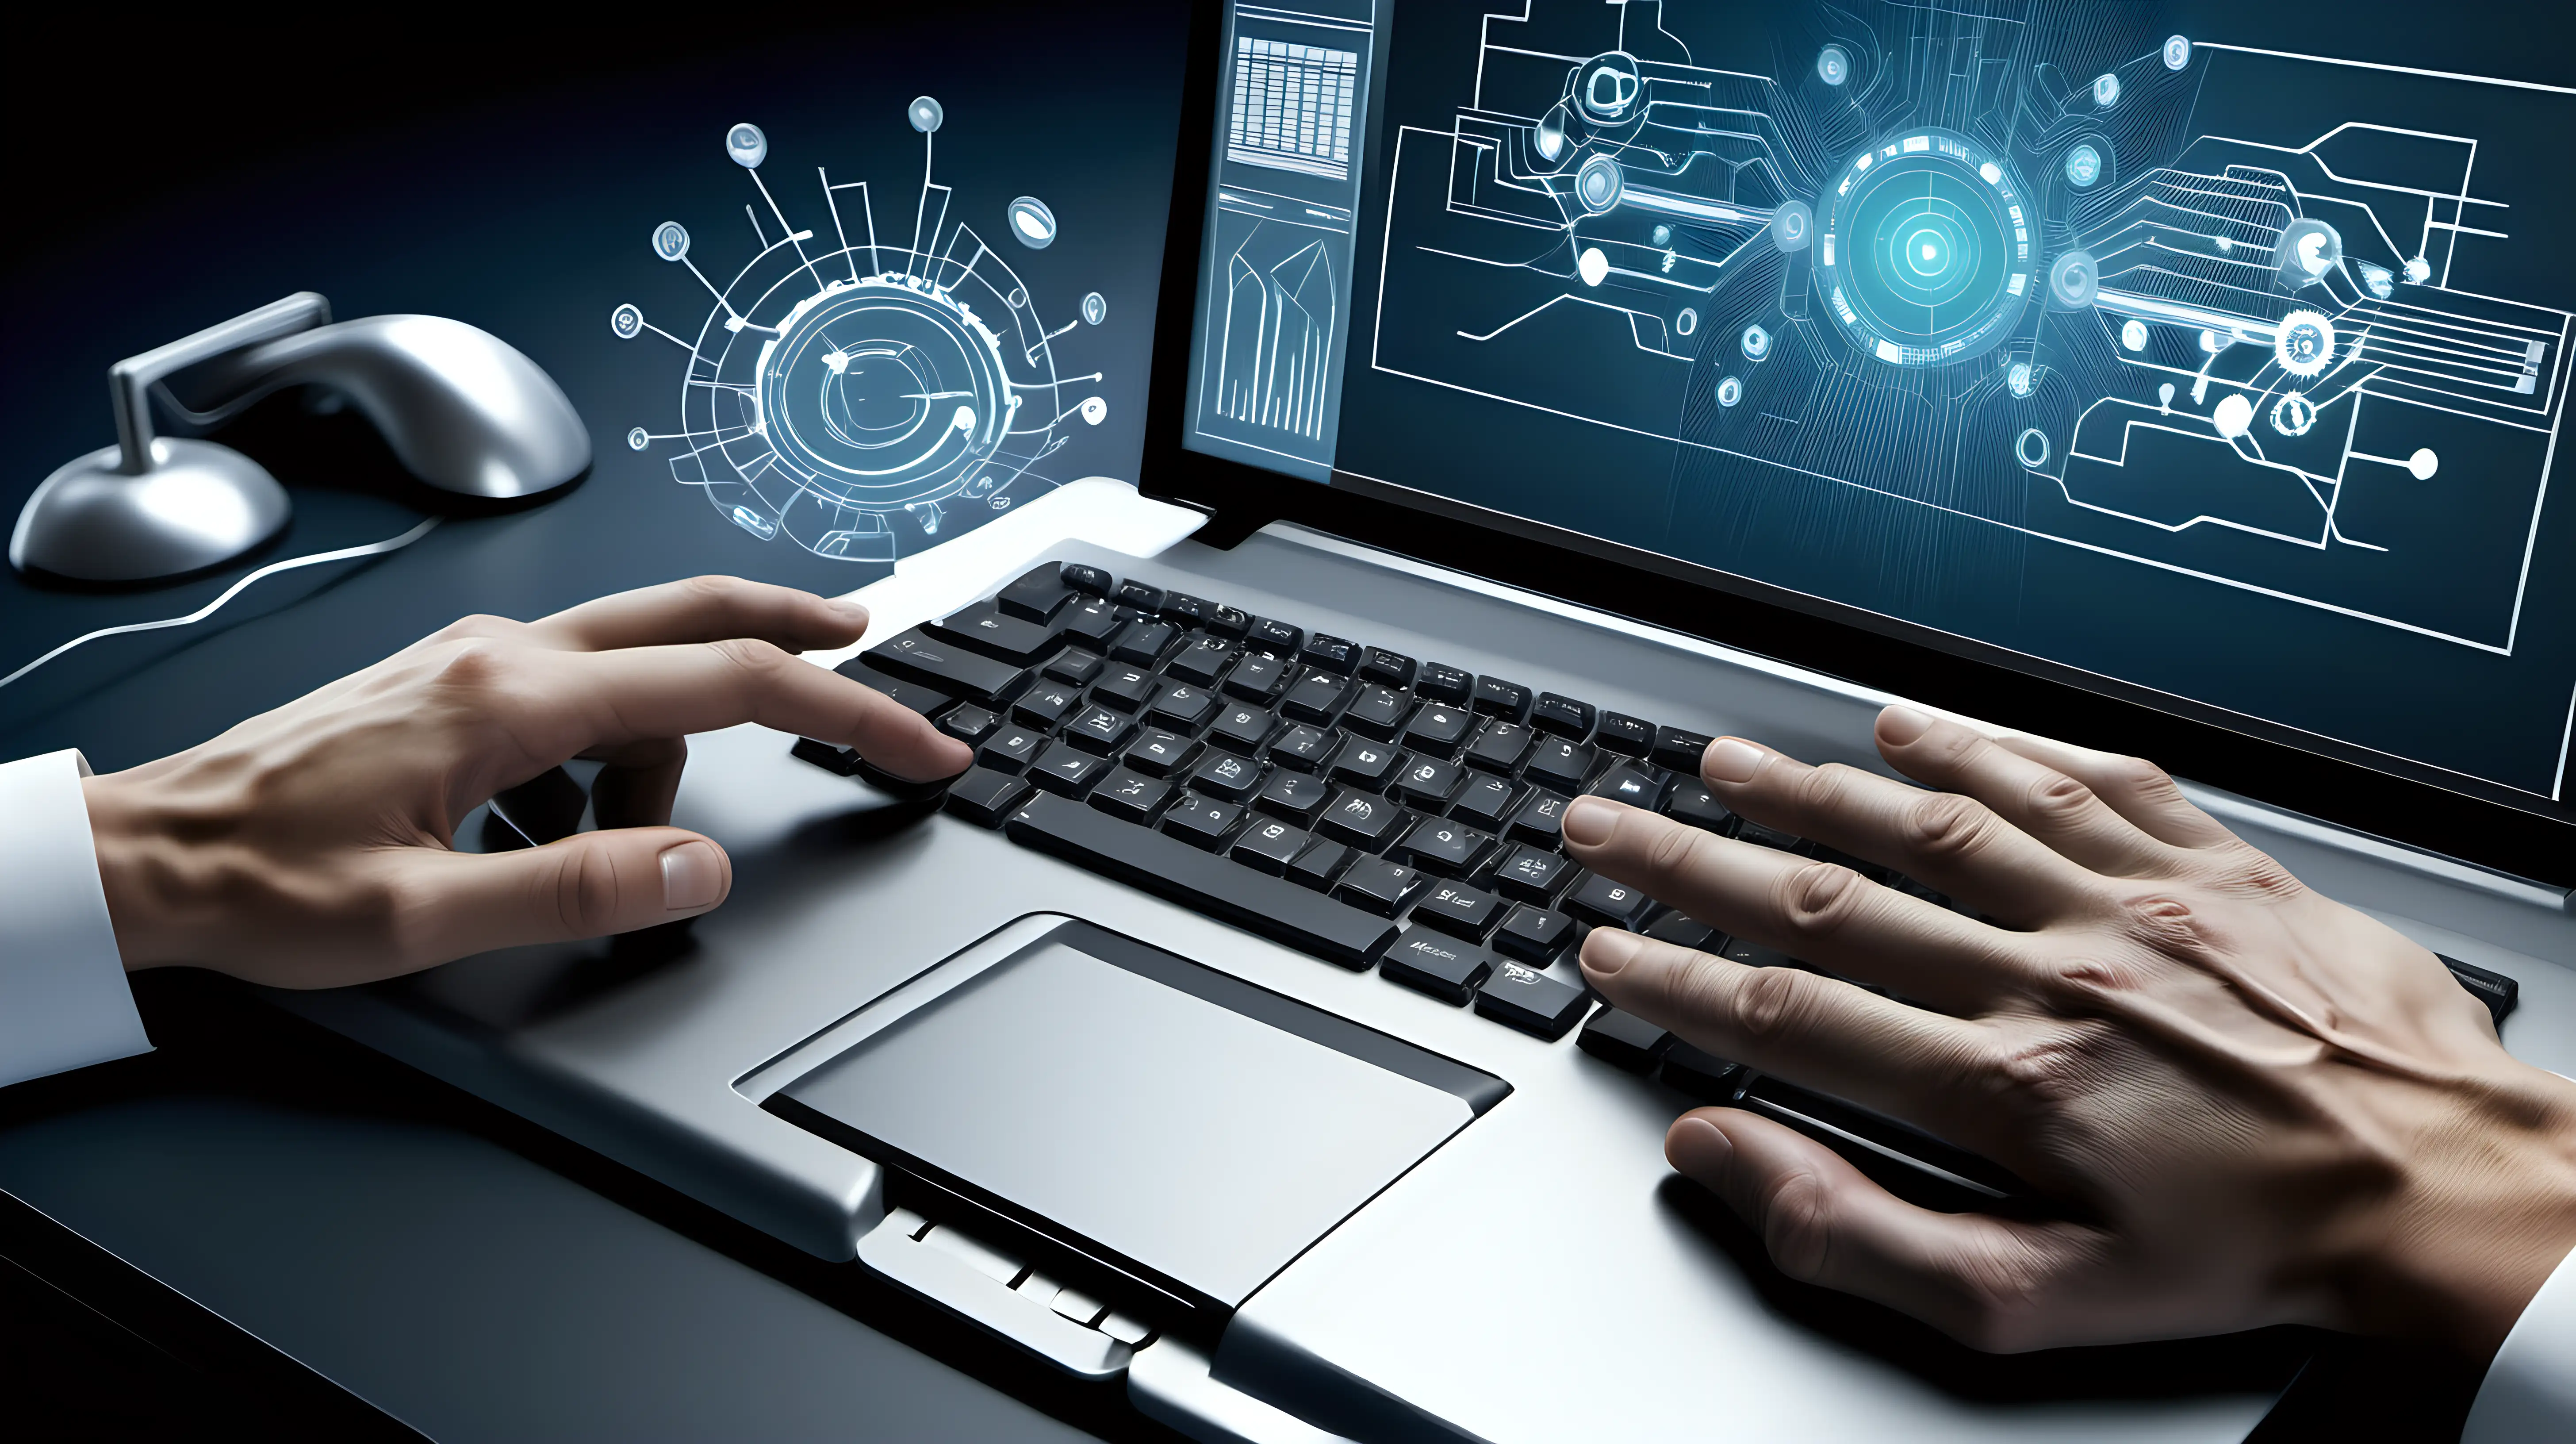 Illustrate the seamless integration of technology and work by emphasizing the synergy between the hands and the computer tools.